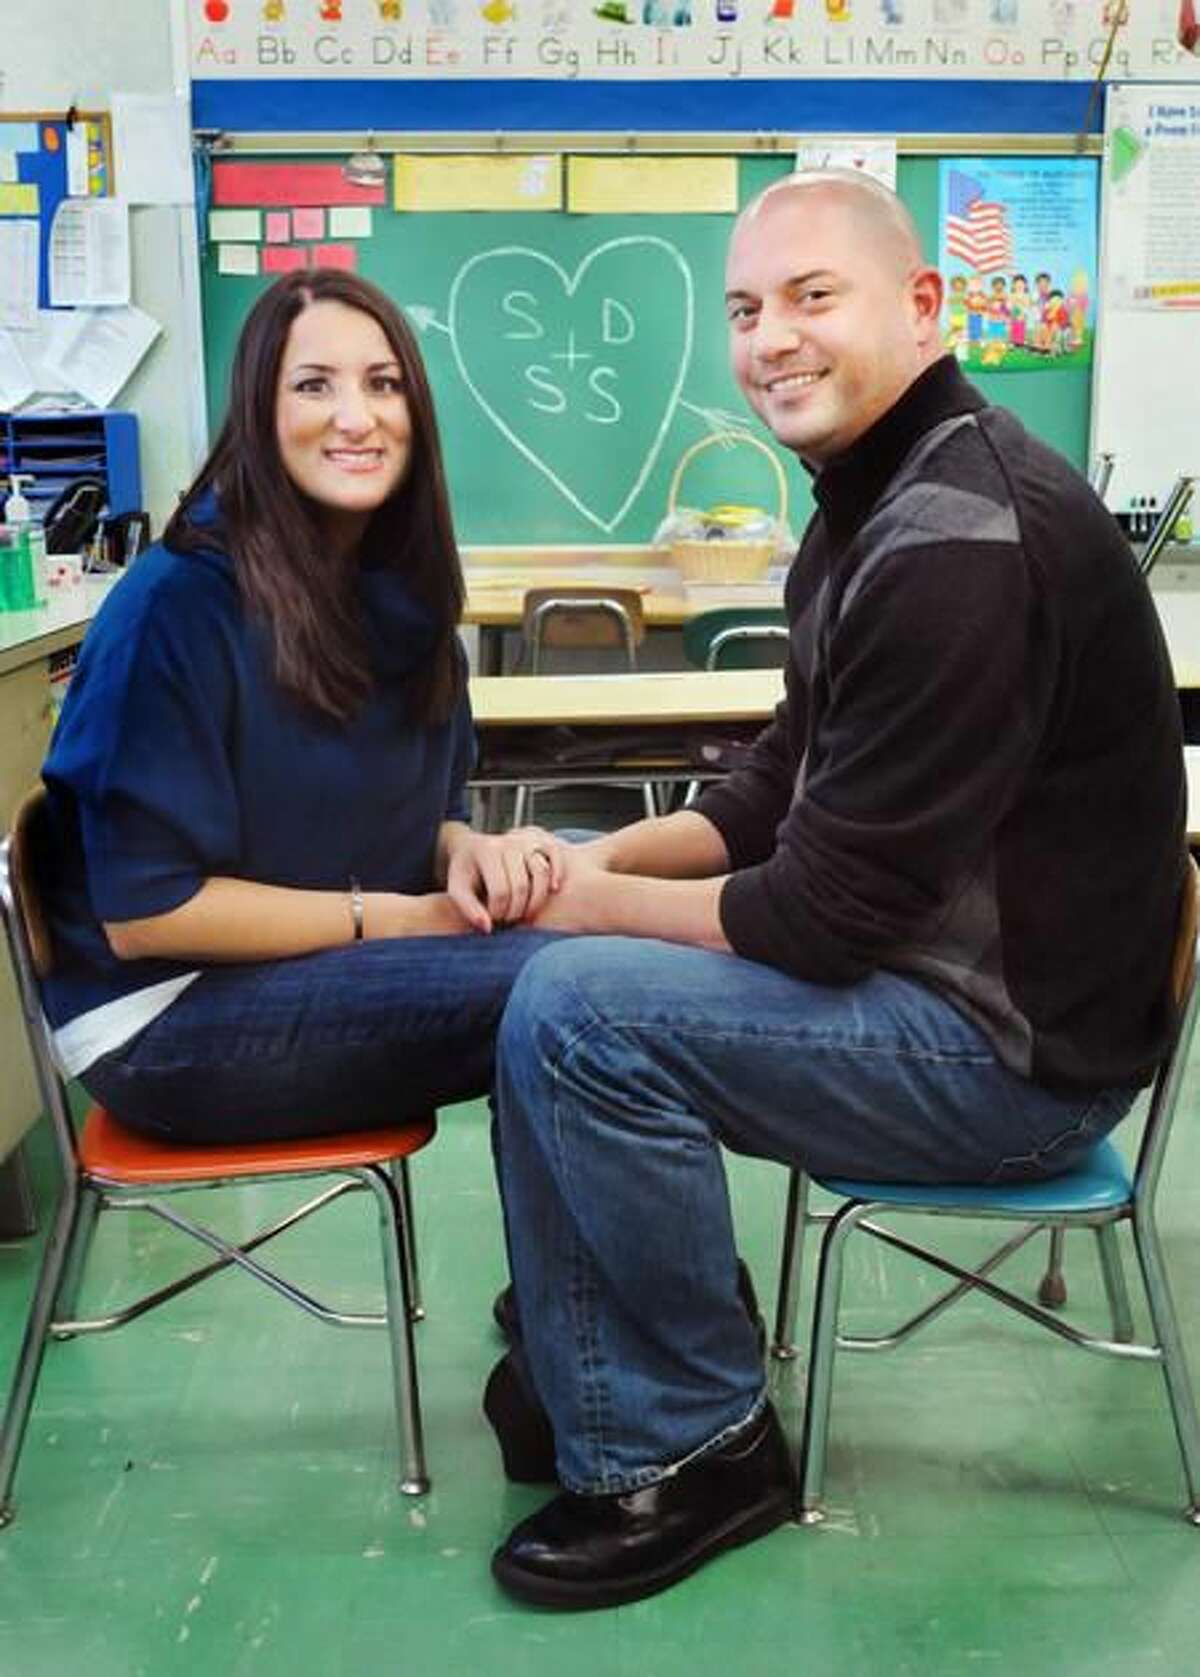 Samantha Sampiere, left, and Steven Dobson have their engagement photos taken at Bradley School in Derby where they first attended classes together. Melanie Stengel/Register